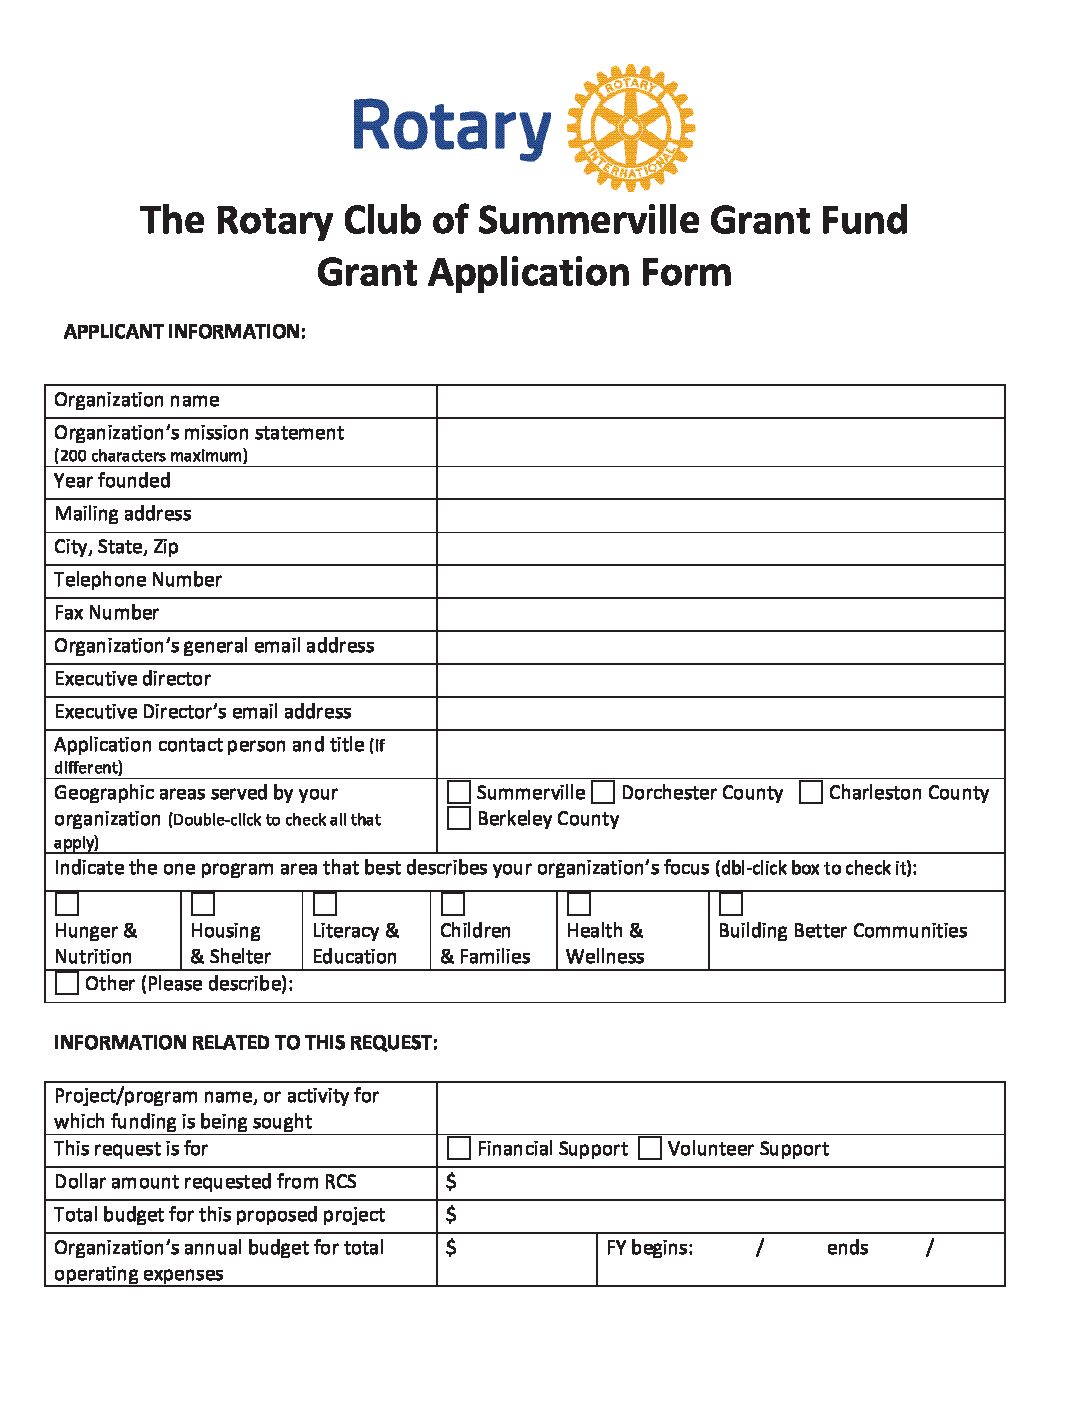 Grant Information Summerville Rotary